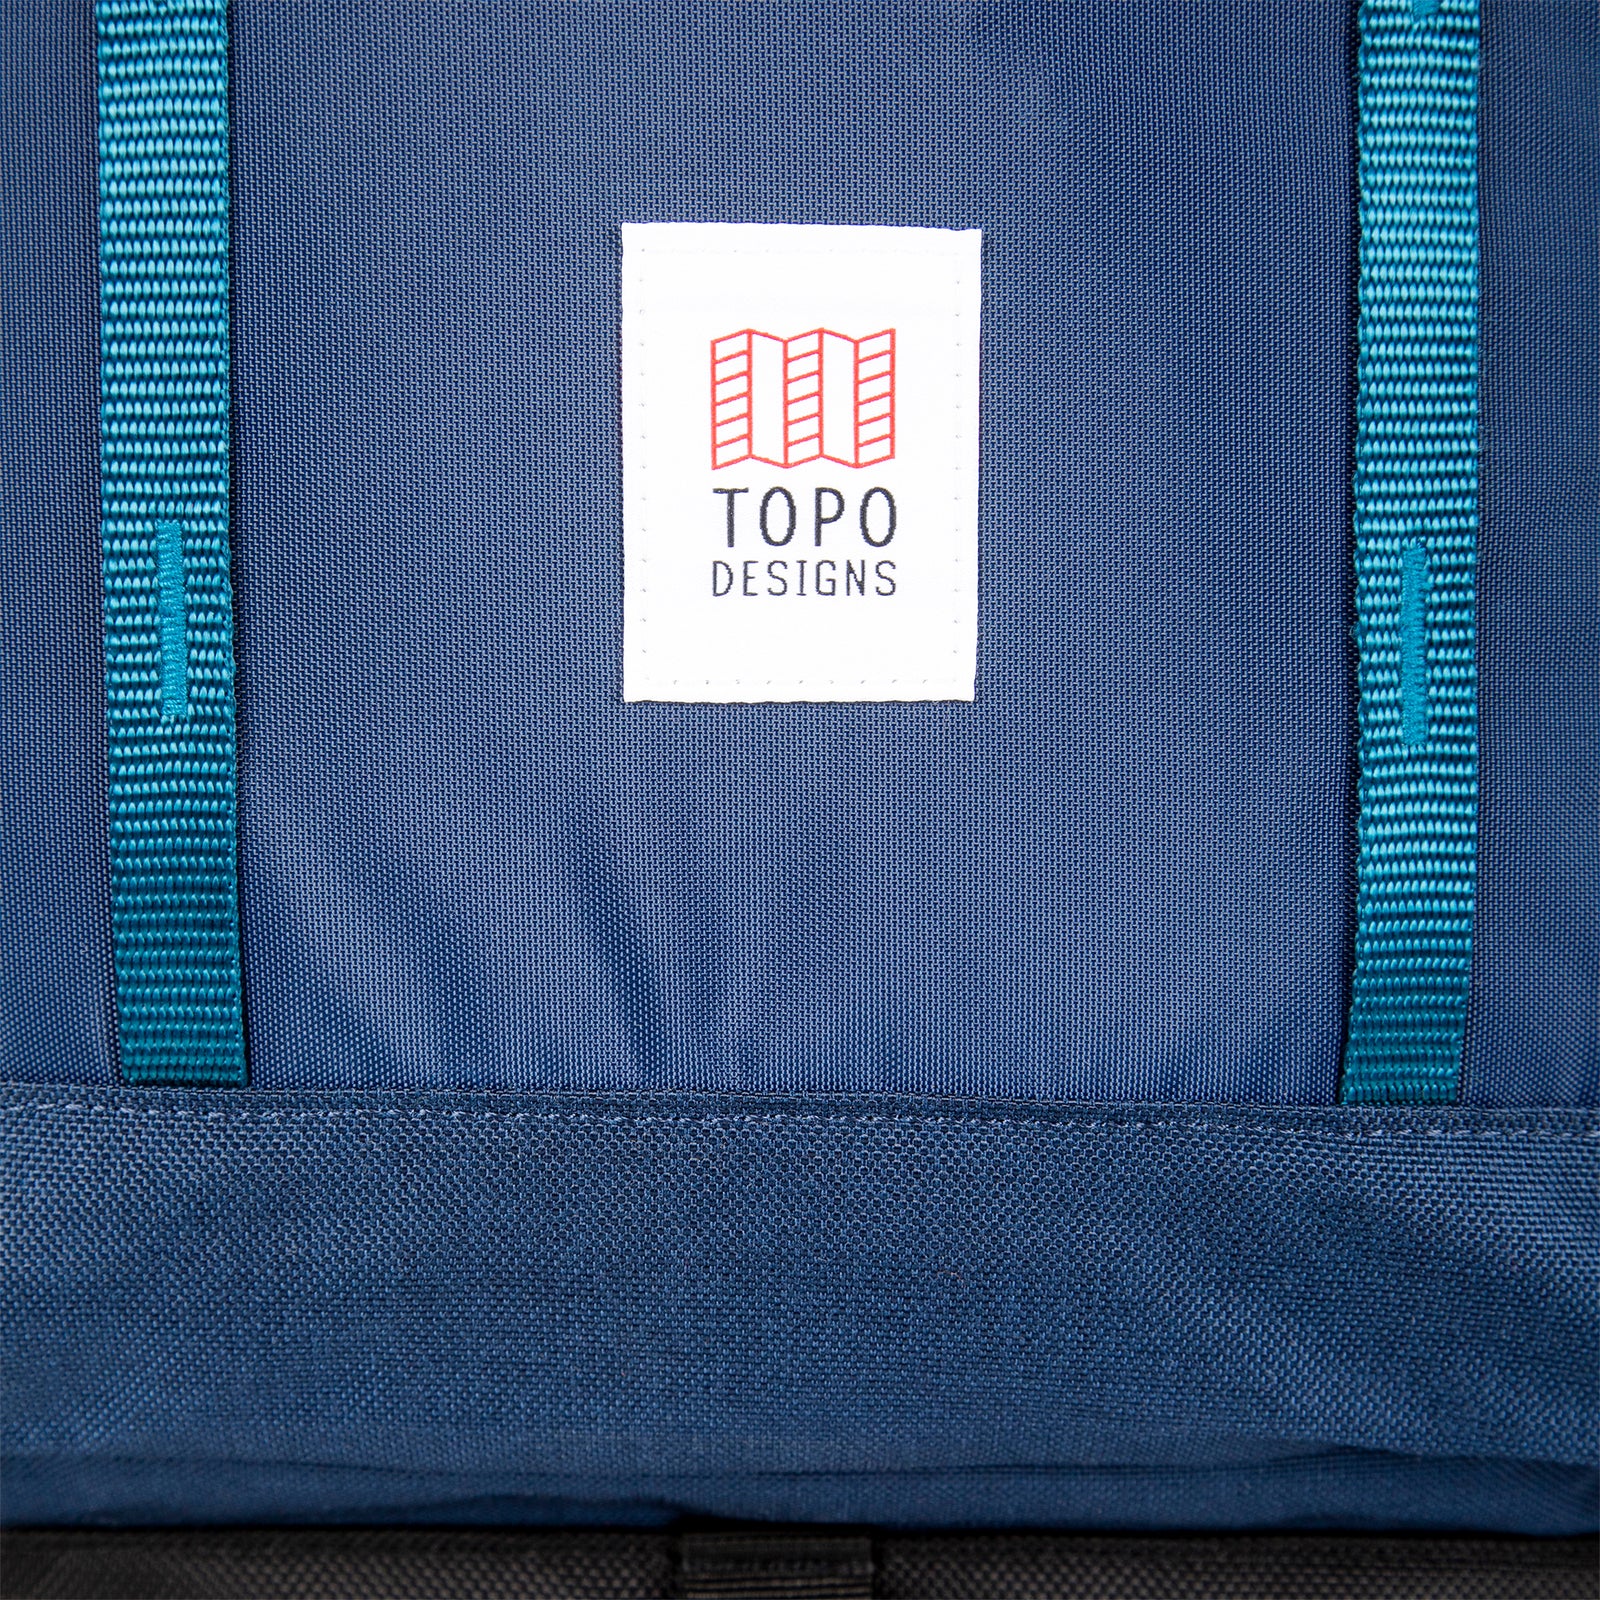 General shot of Topo Designs logo patch and front daisy chain webbing on Global Travel Bag 40L Durable Carry On Convertible Laptop Travel Backpack in Navy blue.